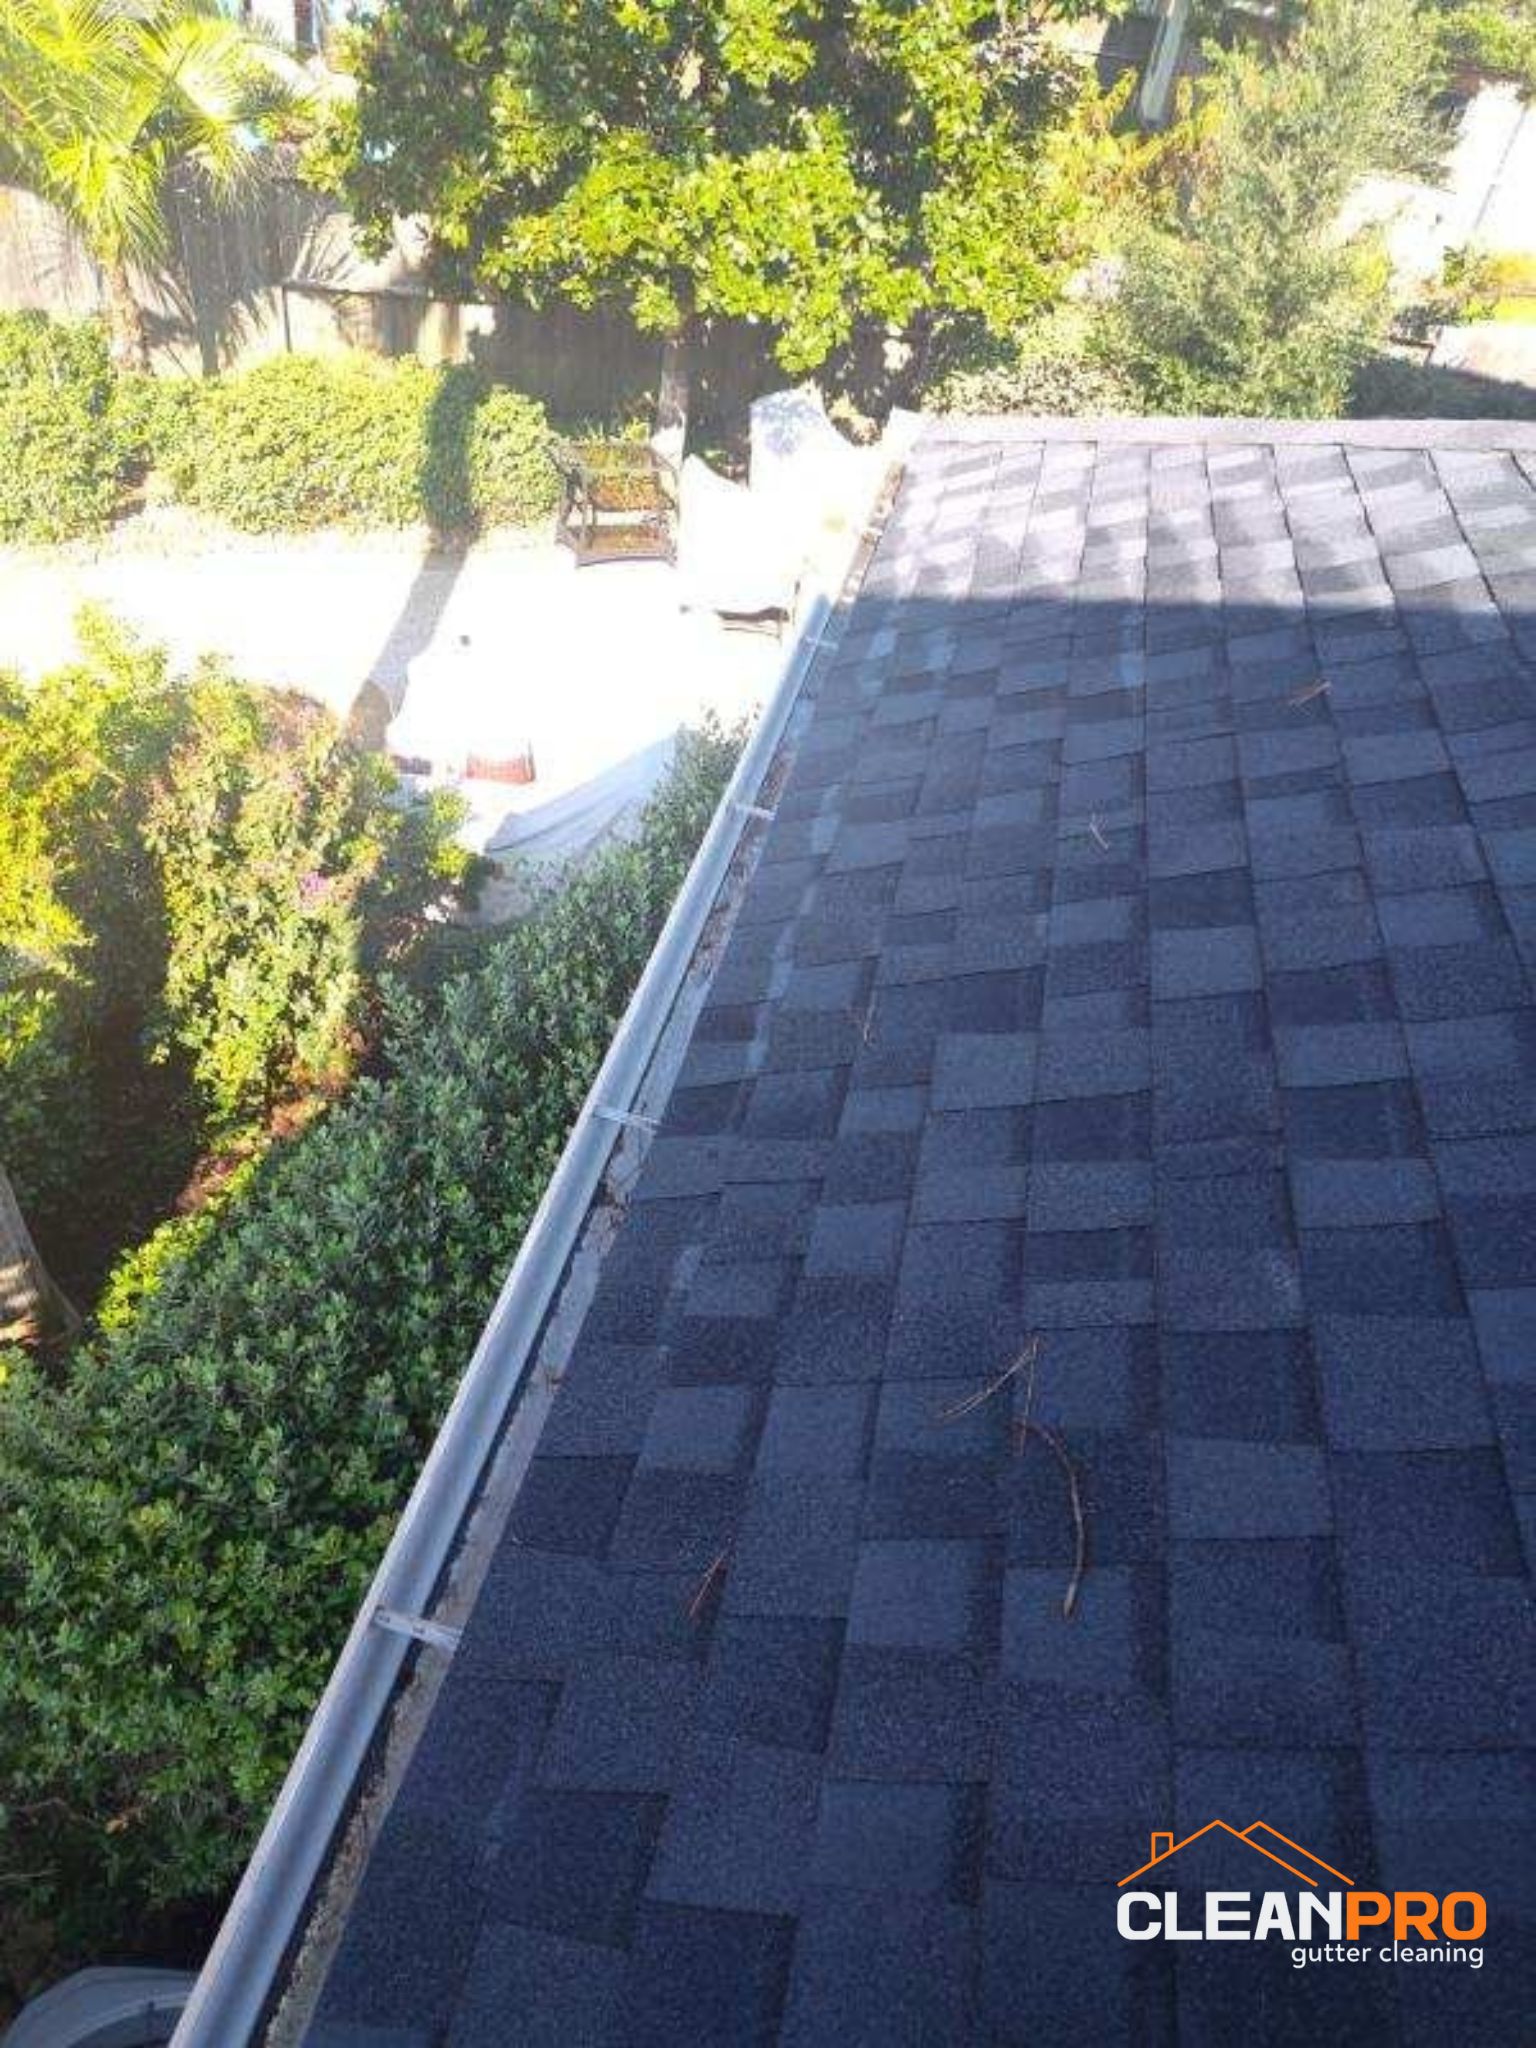 Top Notch Gutter Cleaning Service in Houston